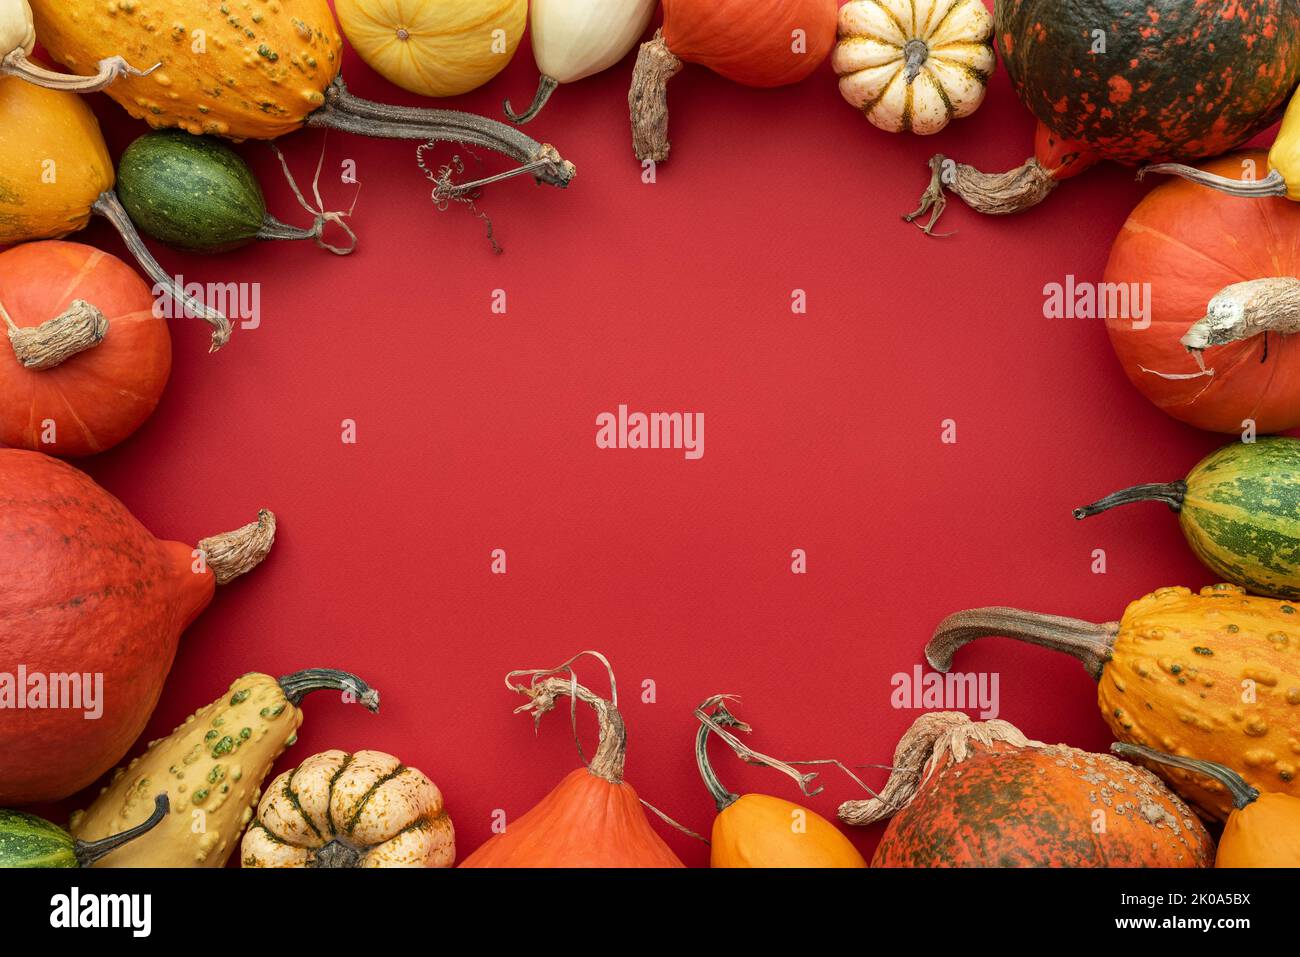 Thanksgiving day greeting card with pumpkin, decorative gourds and winter squash on red background with frame and copy space for text Stock Photo